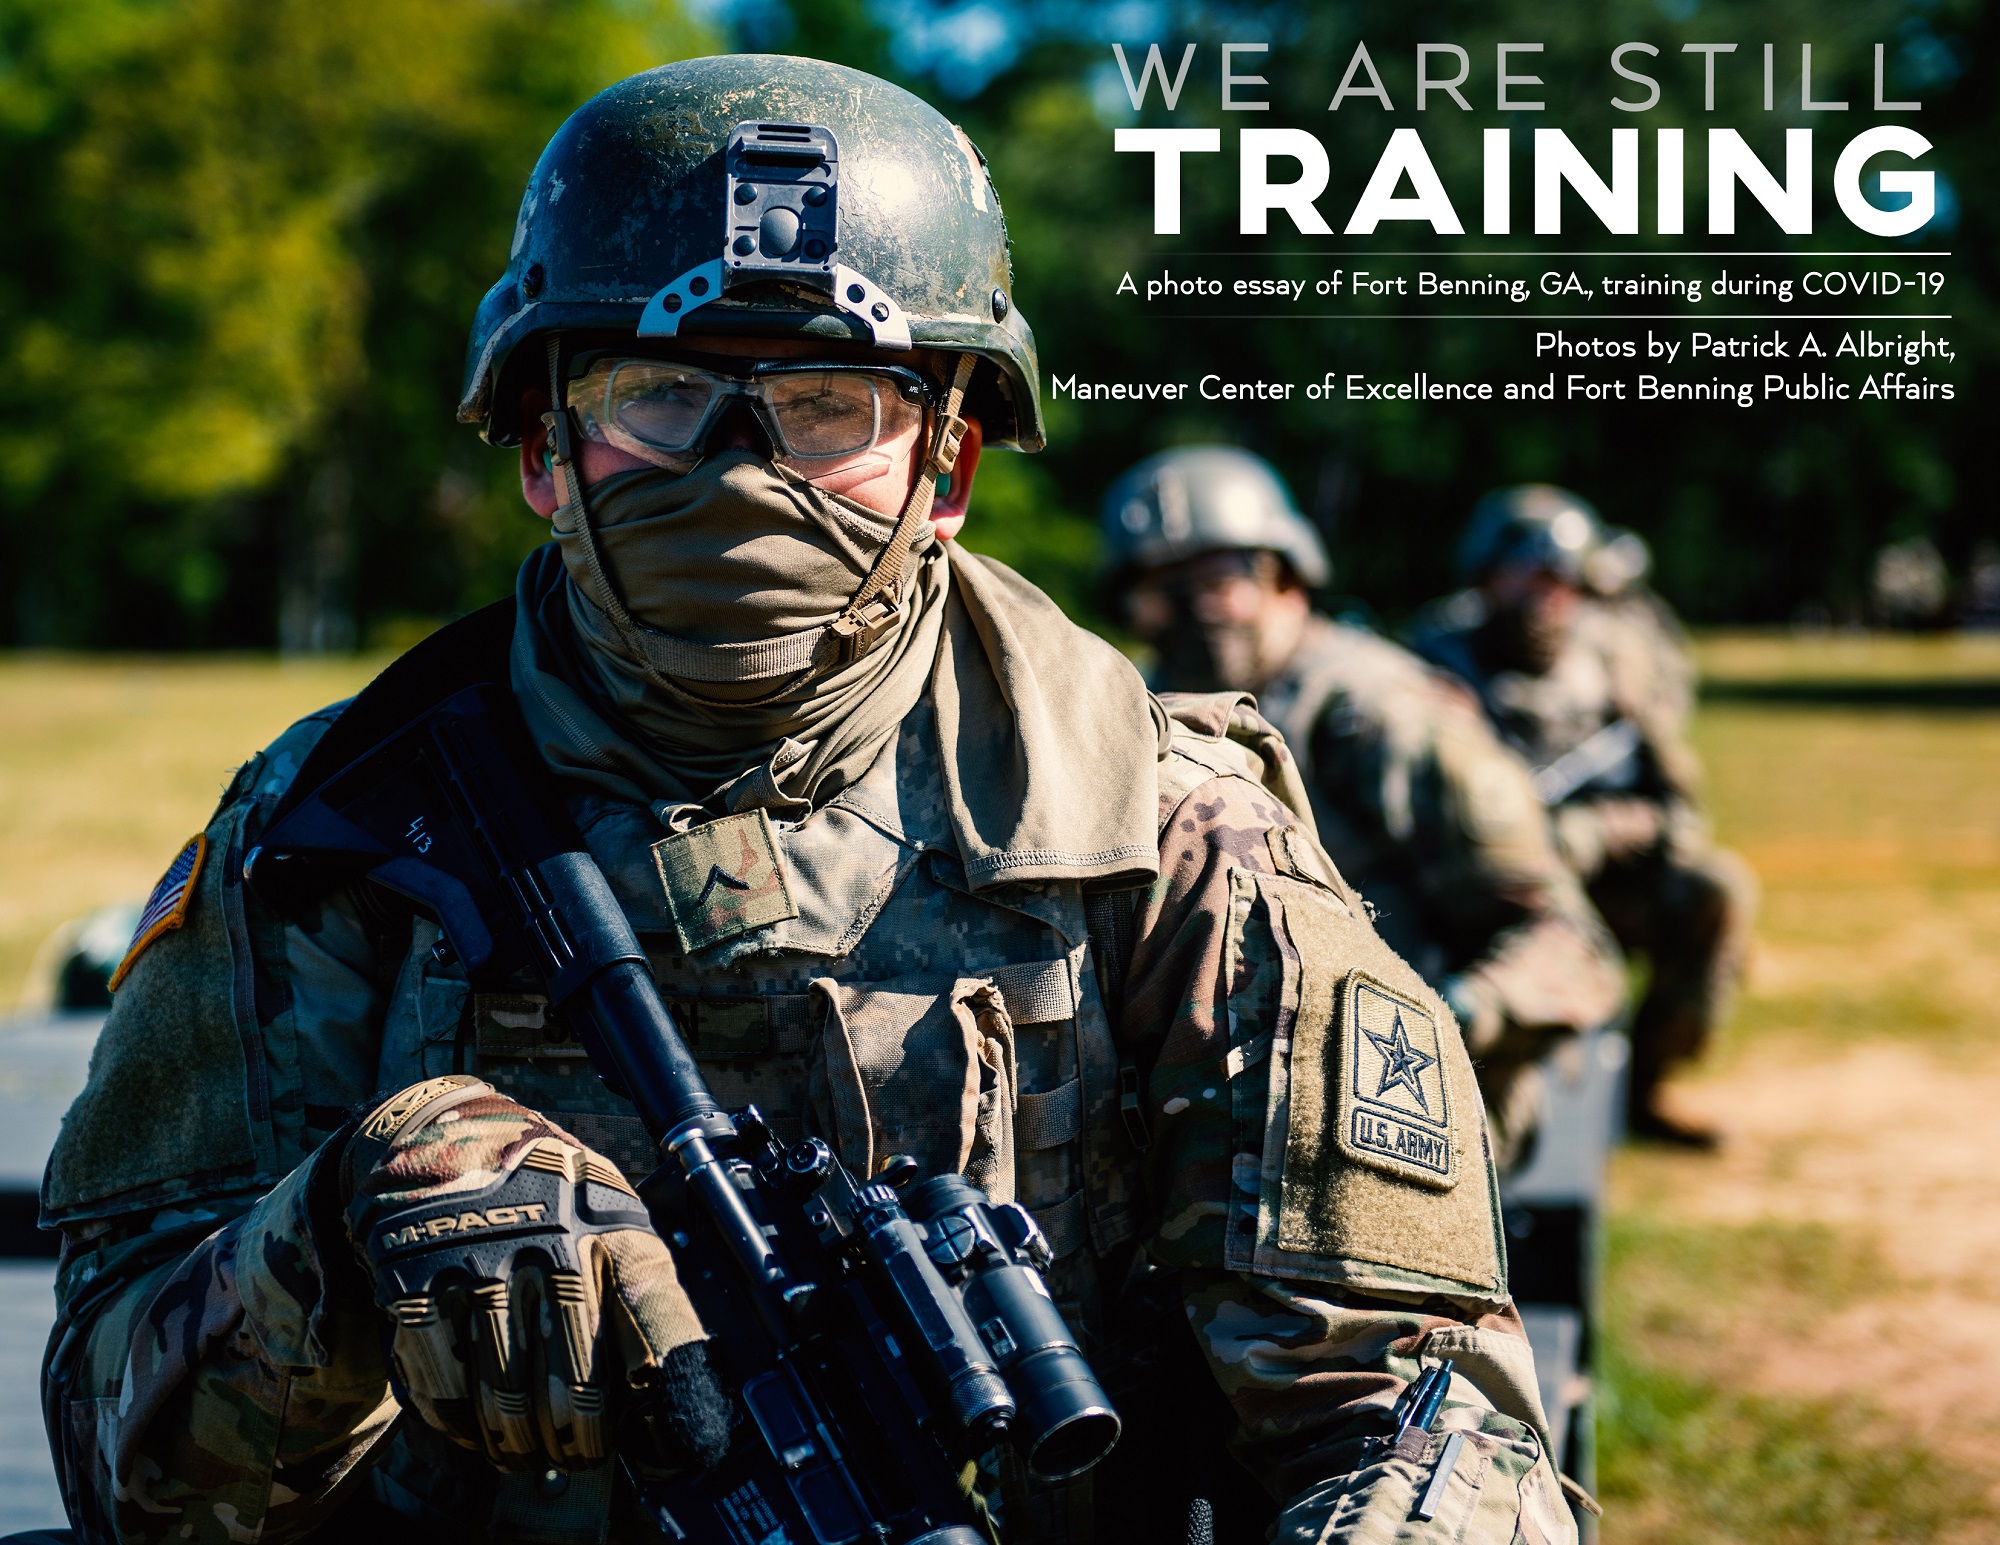 https://www.moore.army.mil/PhotoEssay/We-are-still-training/images/slides/cover%20copy.jpg